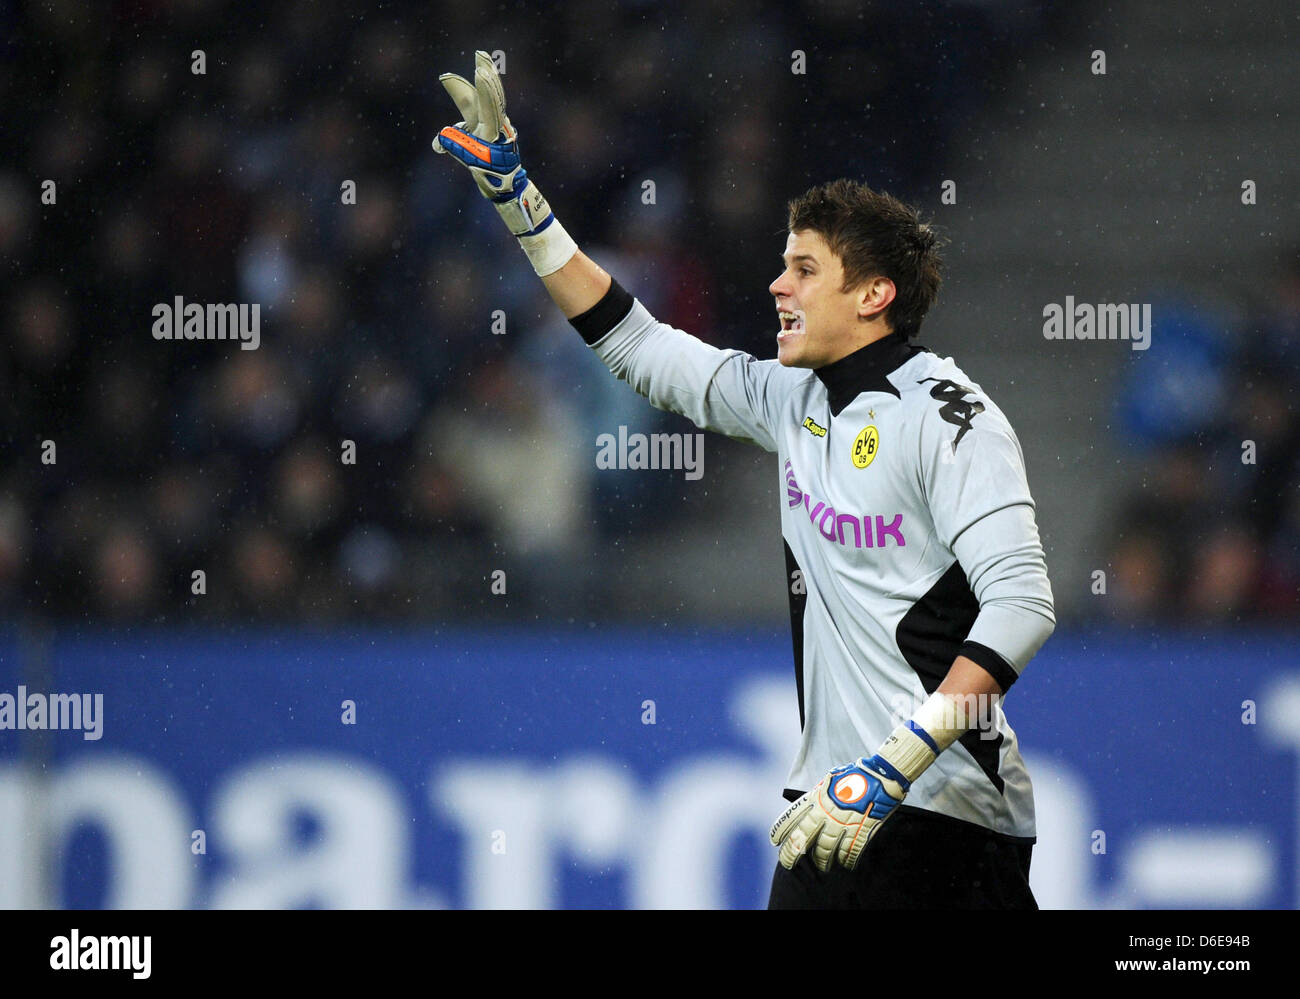 Dortmund's goalkeeper Mitchell Langerak shouts during the Bundesliga soccer match between Hamburger SV and Borussia Dortmund at the Imtech Arena in Hamburg, Germany, 22 January 2012. Dortmund won the match 1-5. Photo: Christian Charisius (ATTENTION: EMBARGO CONDITIONS! The DFL permits the further utilisation of the pictures in IPTV, mobile services and other new technologies only n Stock Photo